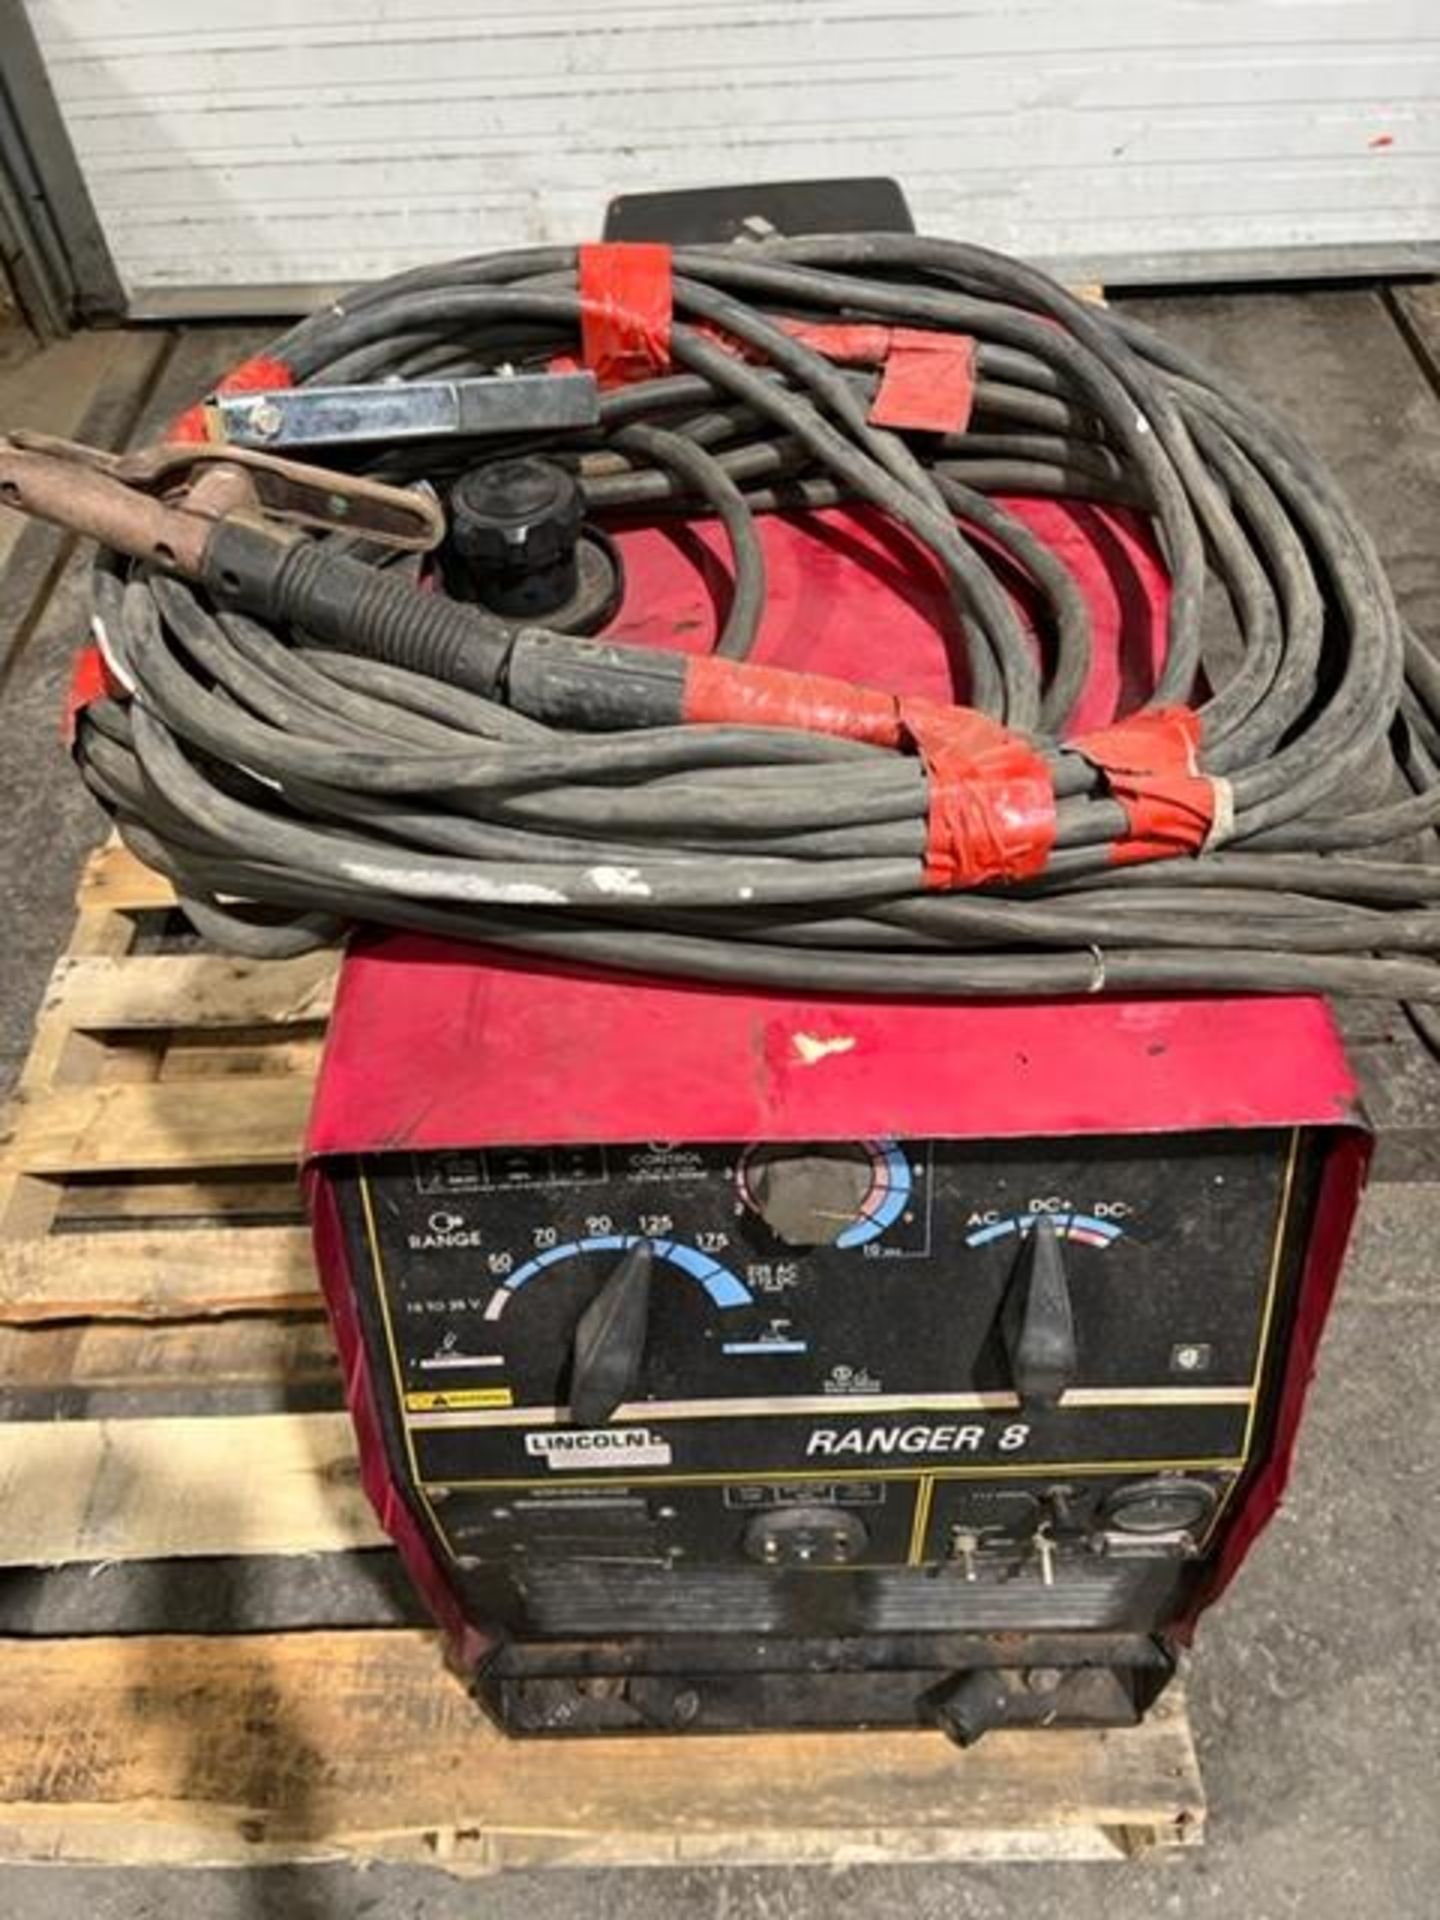 Lincoln Ranger 8 Portable Gas Welder / Generator - portable unit with Cables - Image 2 of 4